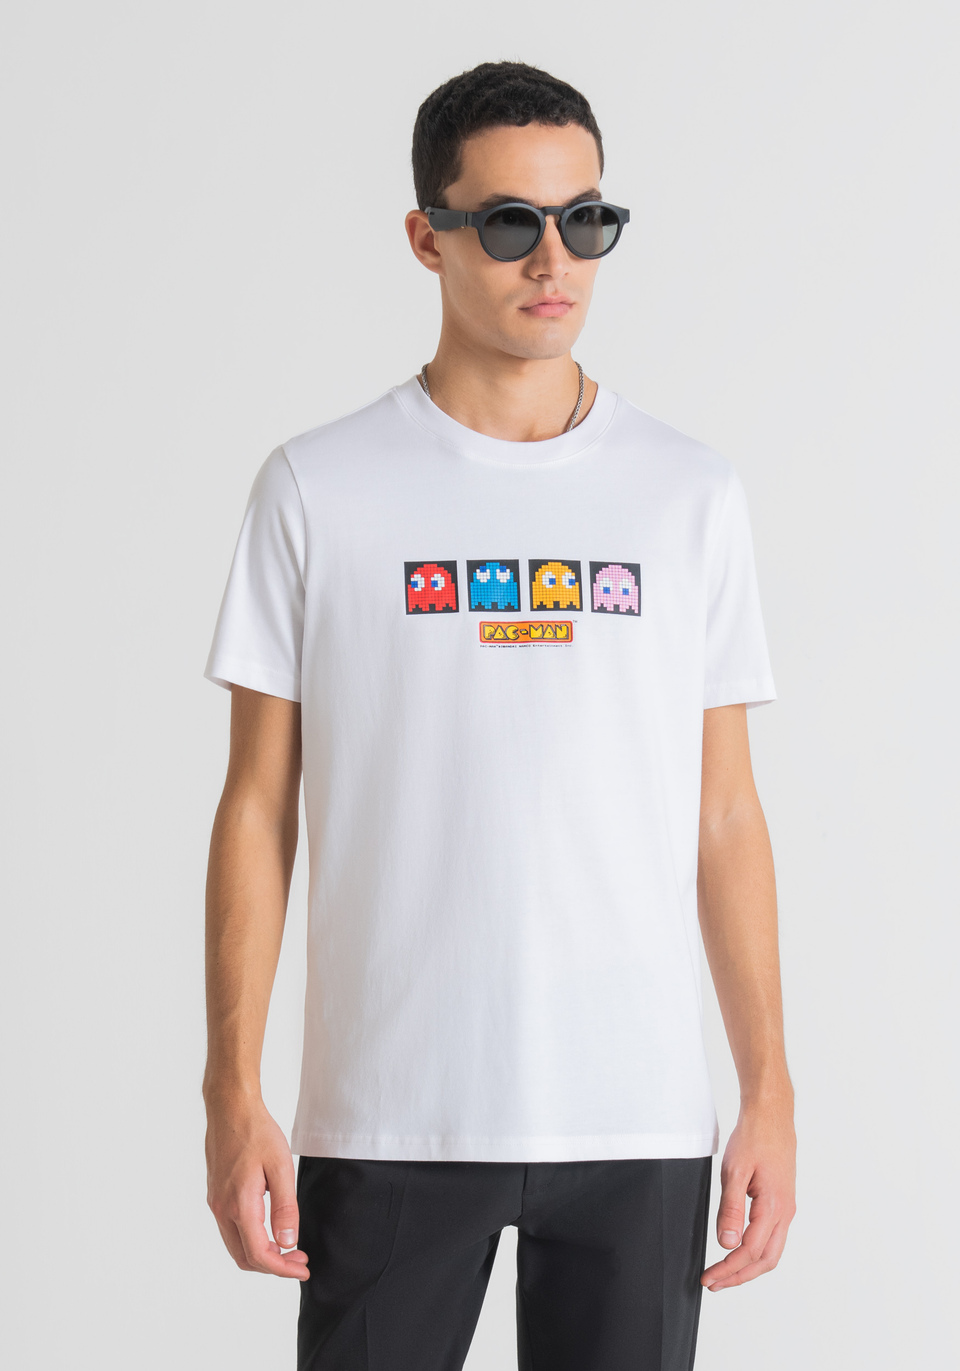 T-SHIRT REGULAR FIT IN 100% COTONE CON STAMPA PAC-MAN - Antony Morato Online Shop